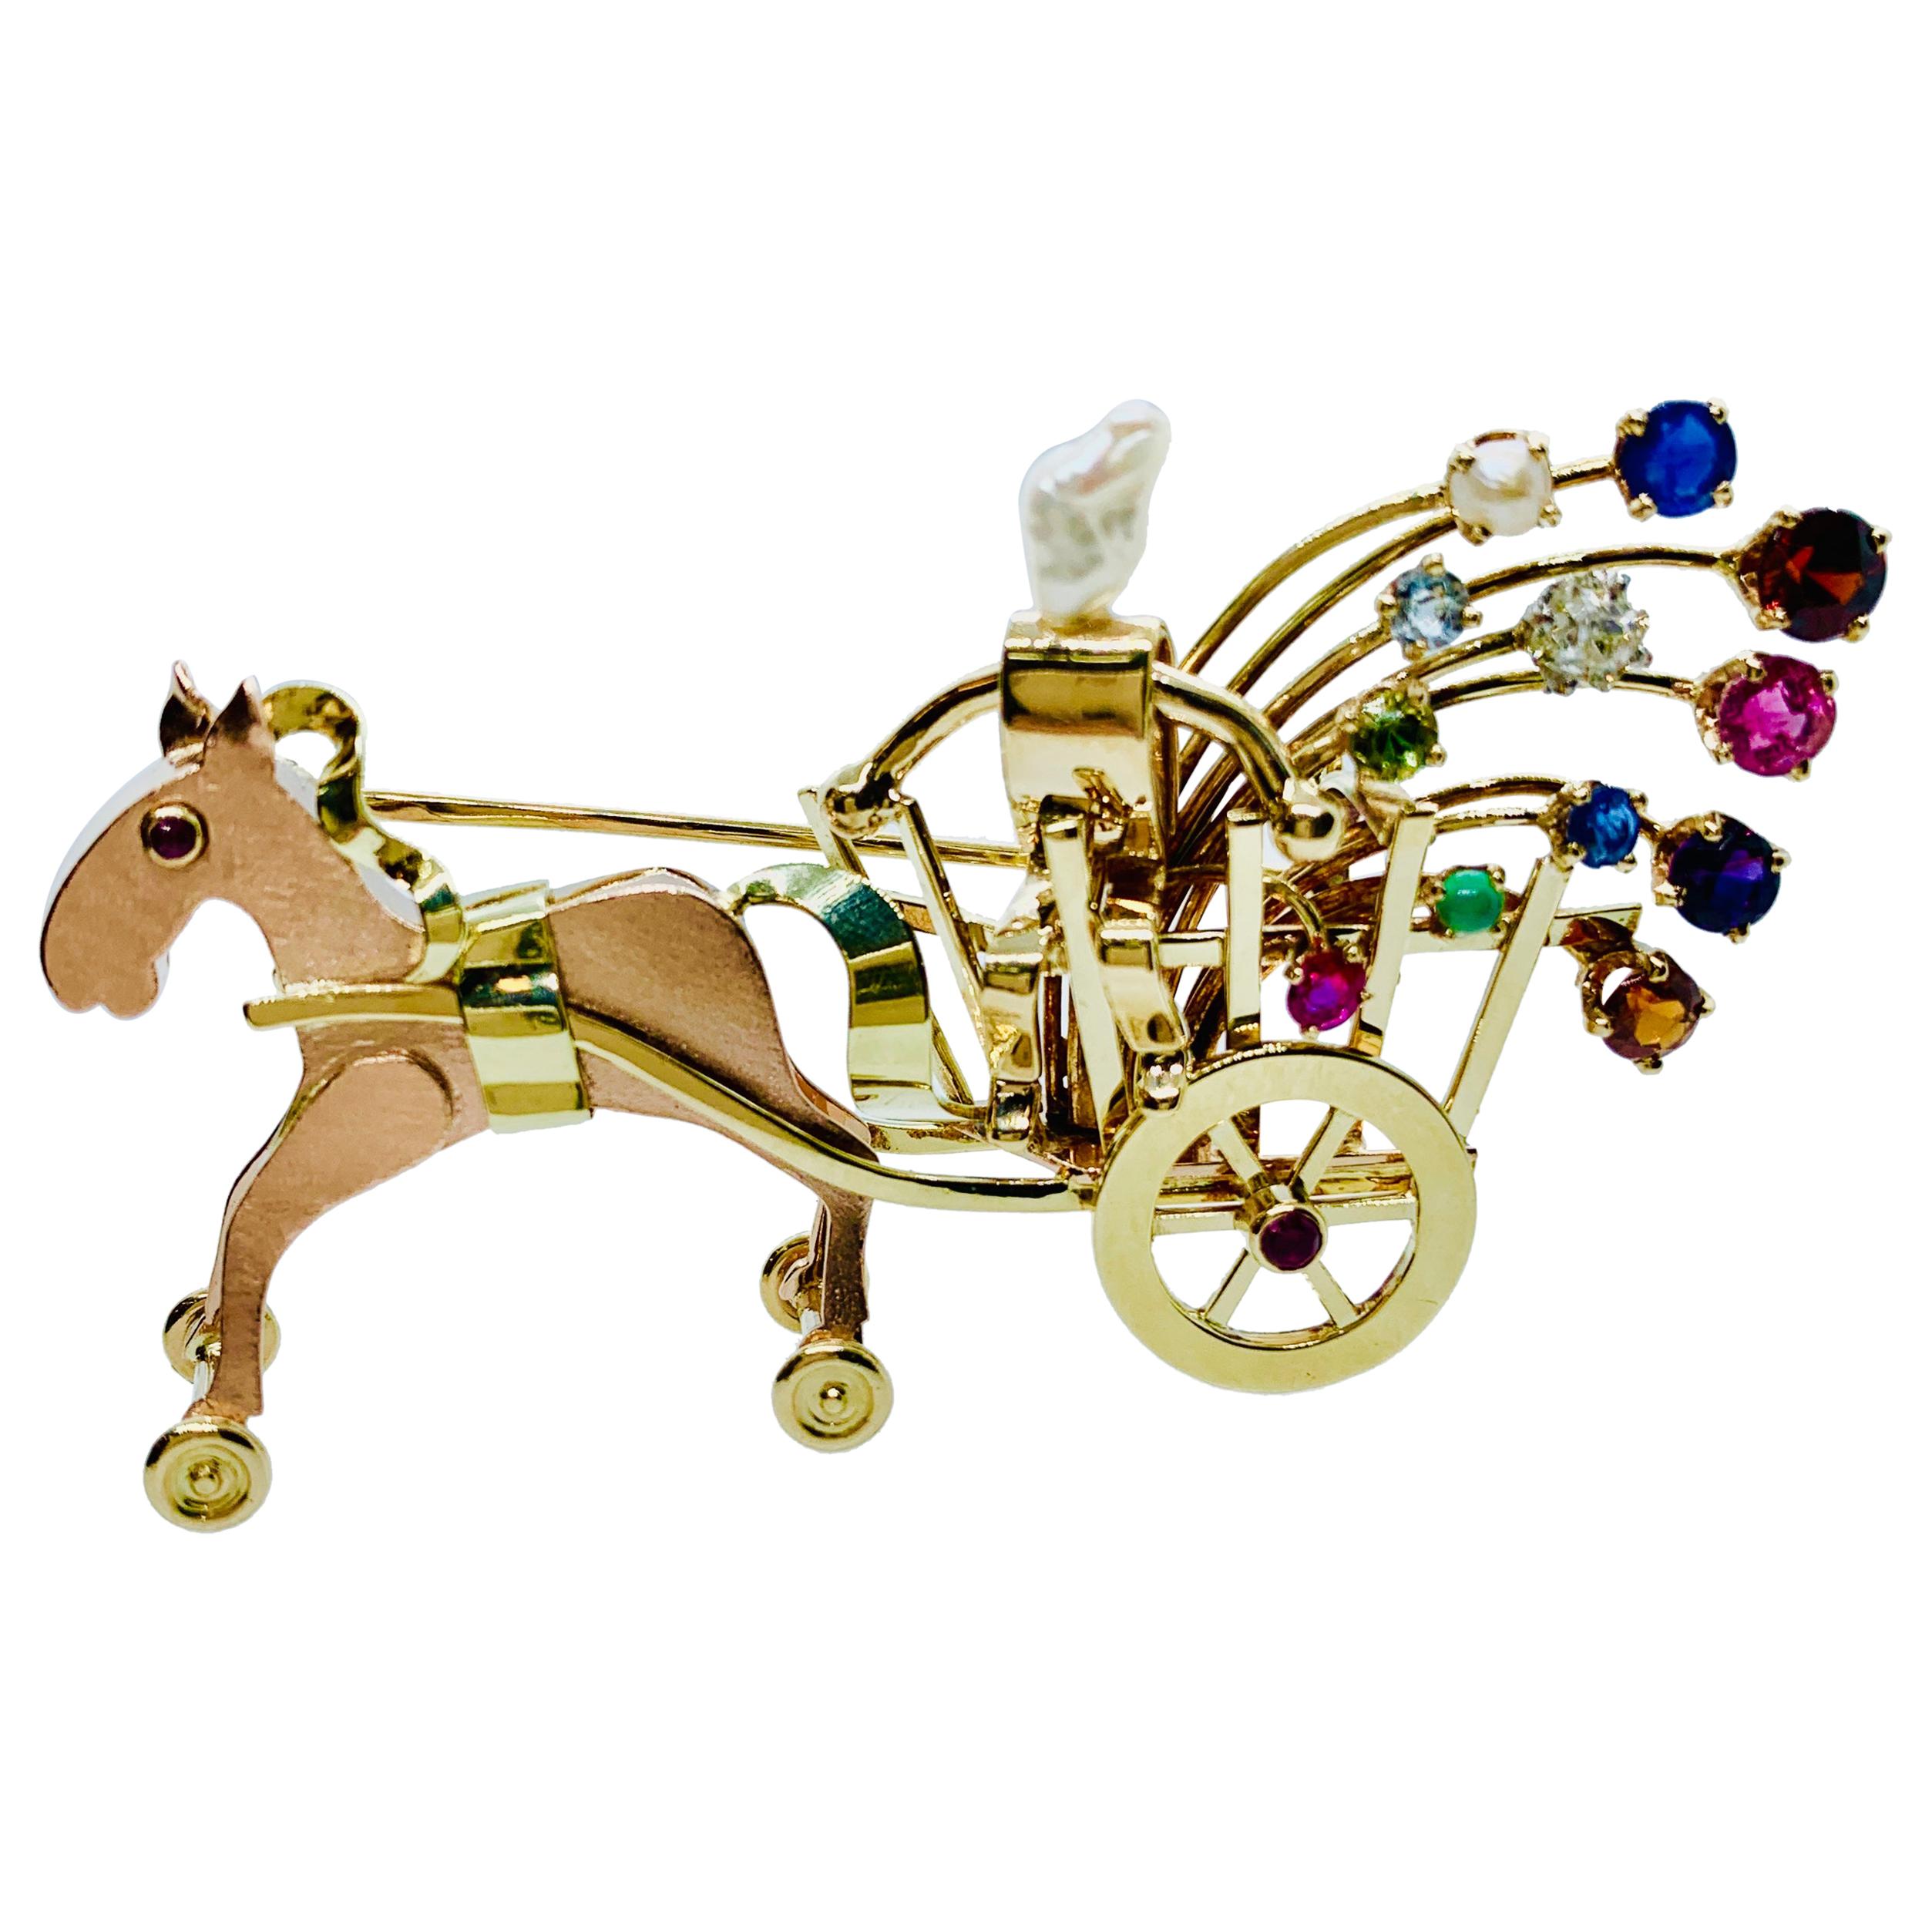 Vintage Neiman Marcus 14 Karat Gold and Gemstone Horse and Carriage Brooch